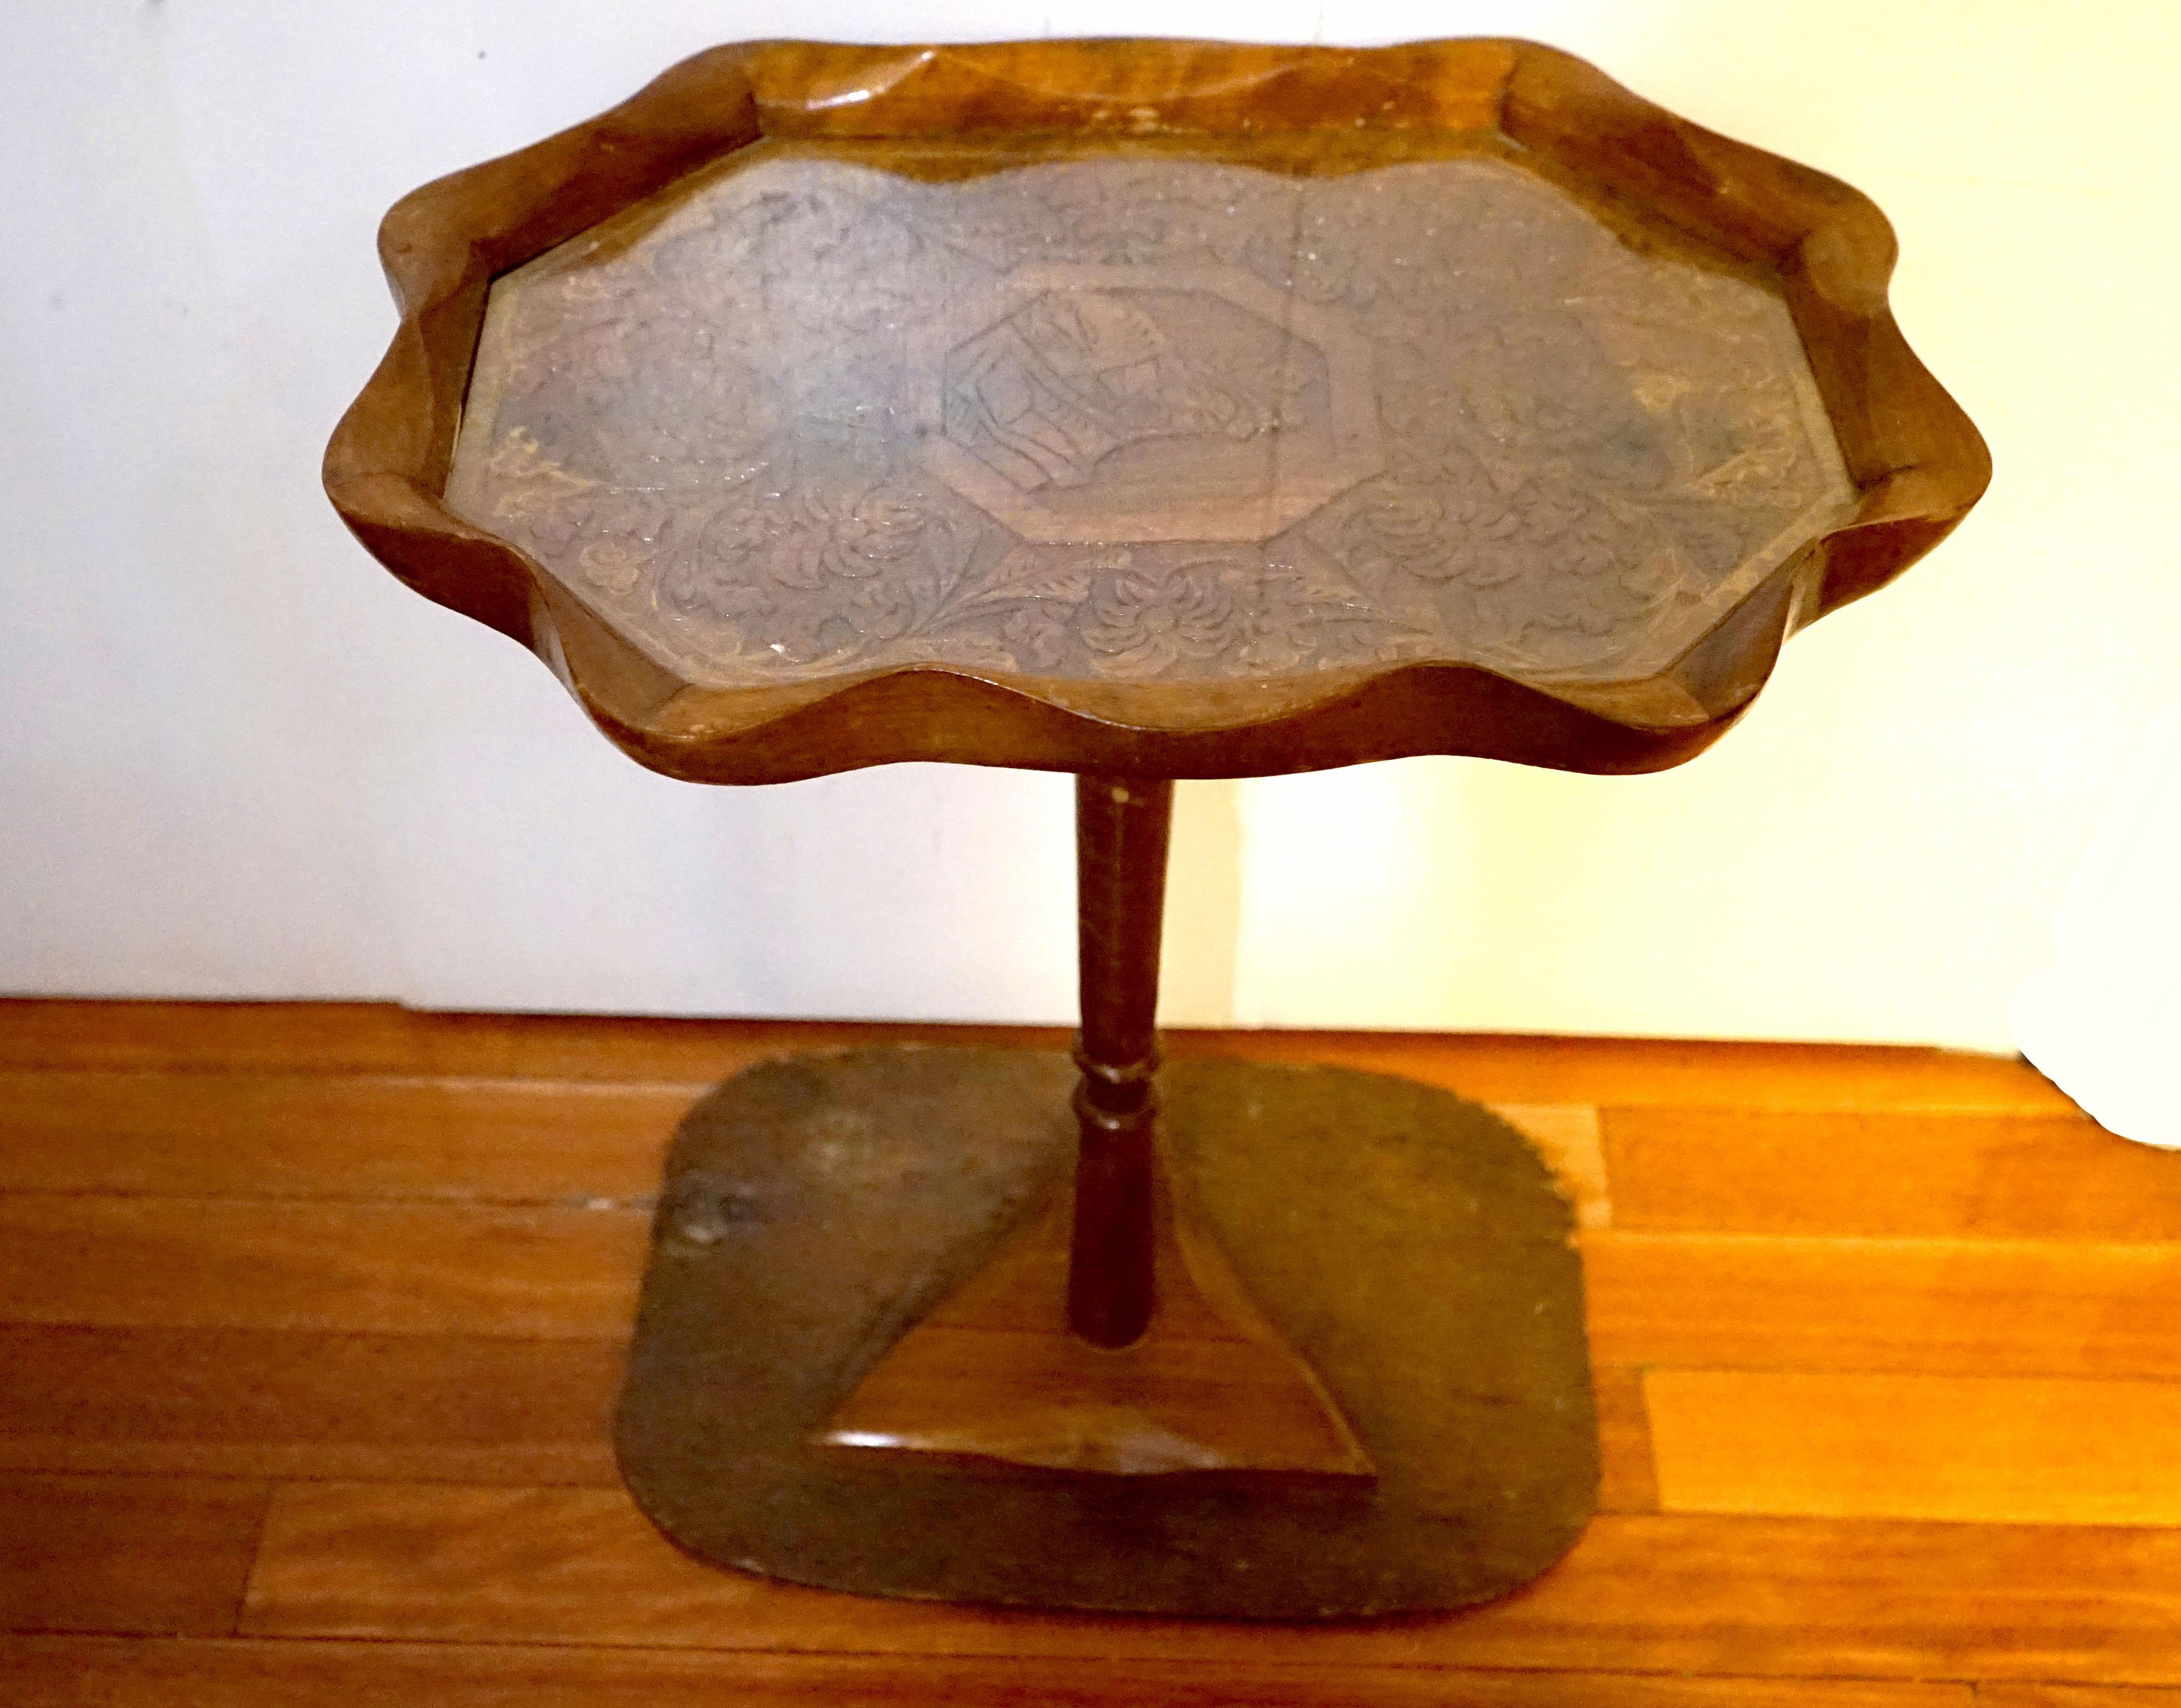 19th Century Collectible Maple or Walnut Hand-Carved Table with Scalloped Rim For Sale 5